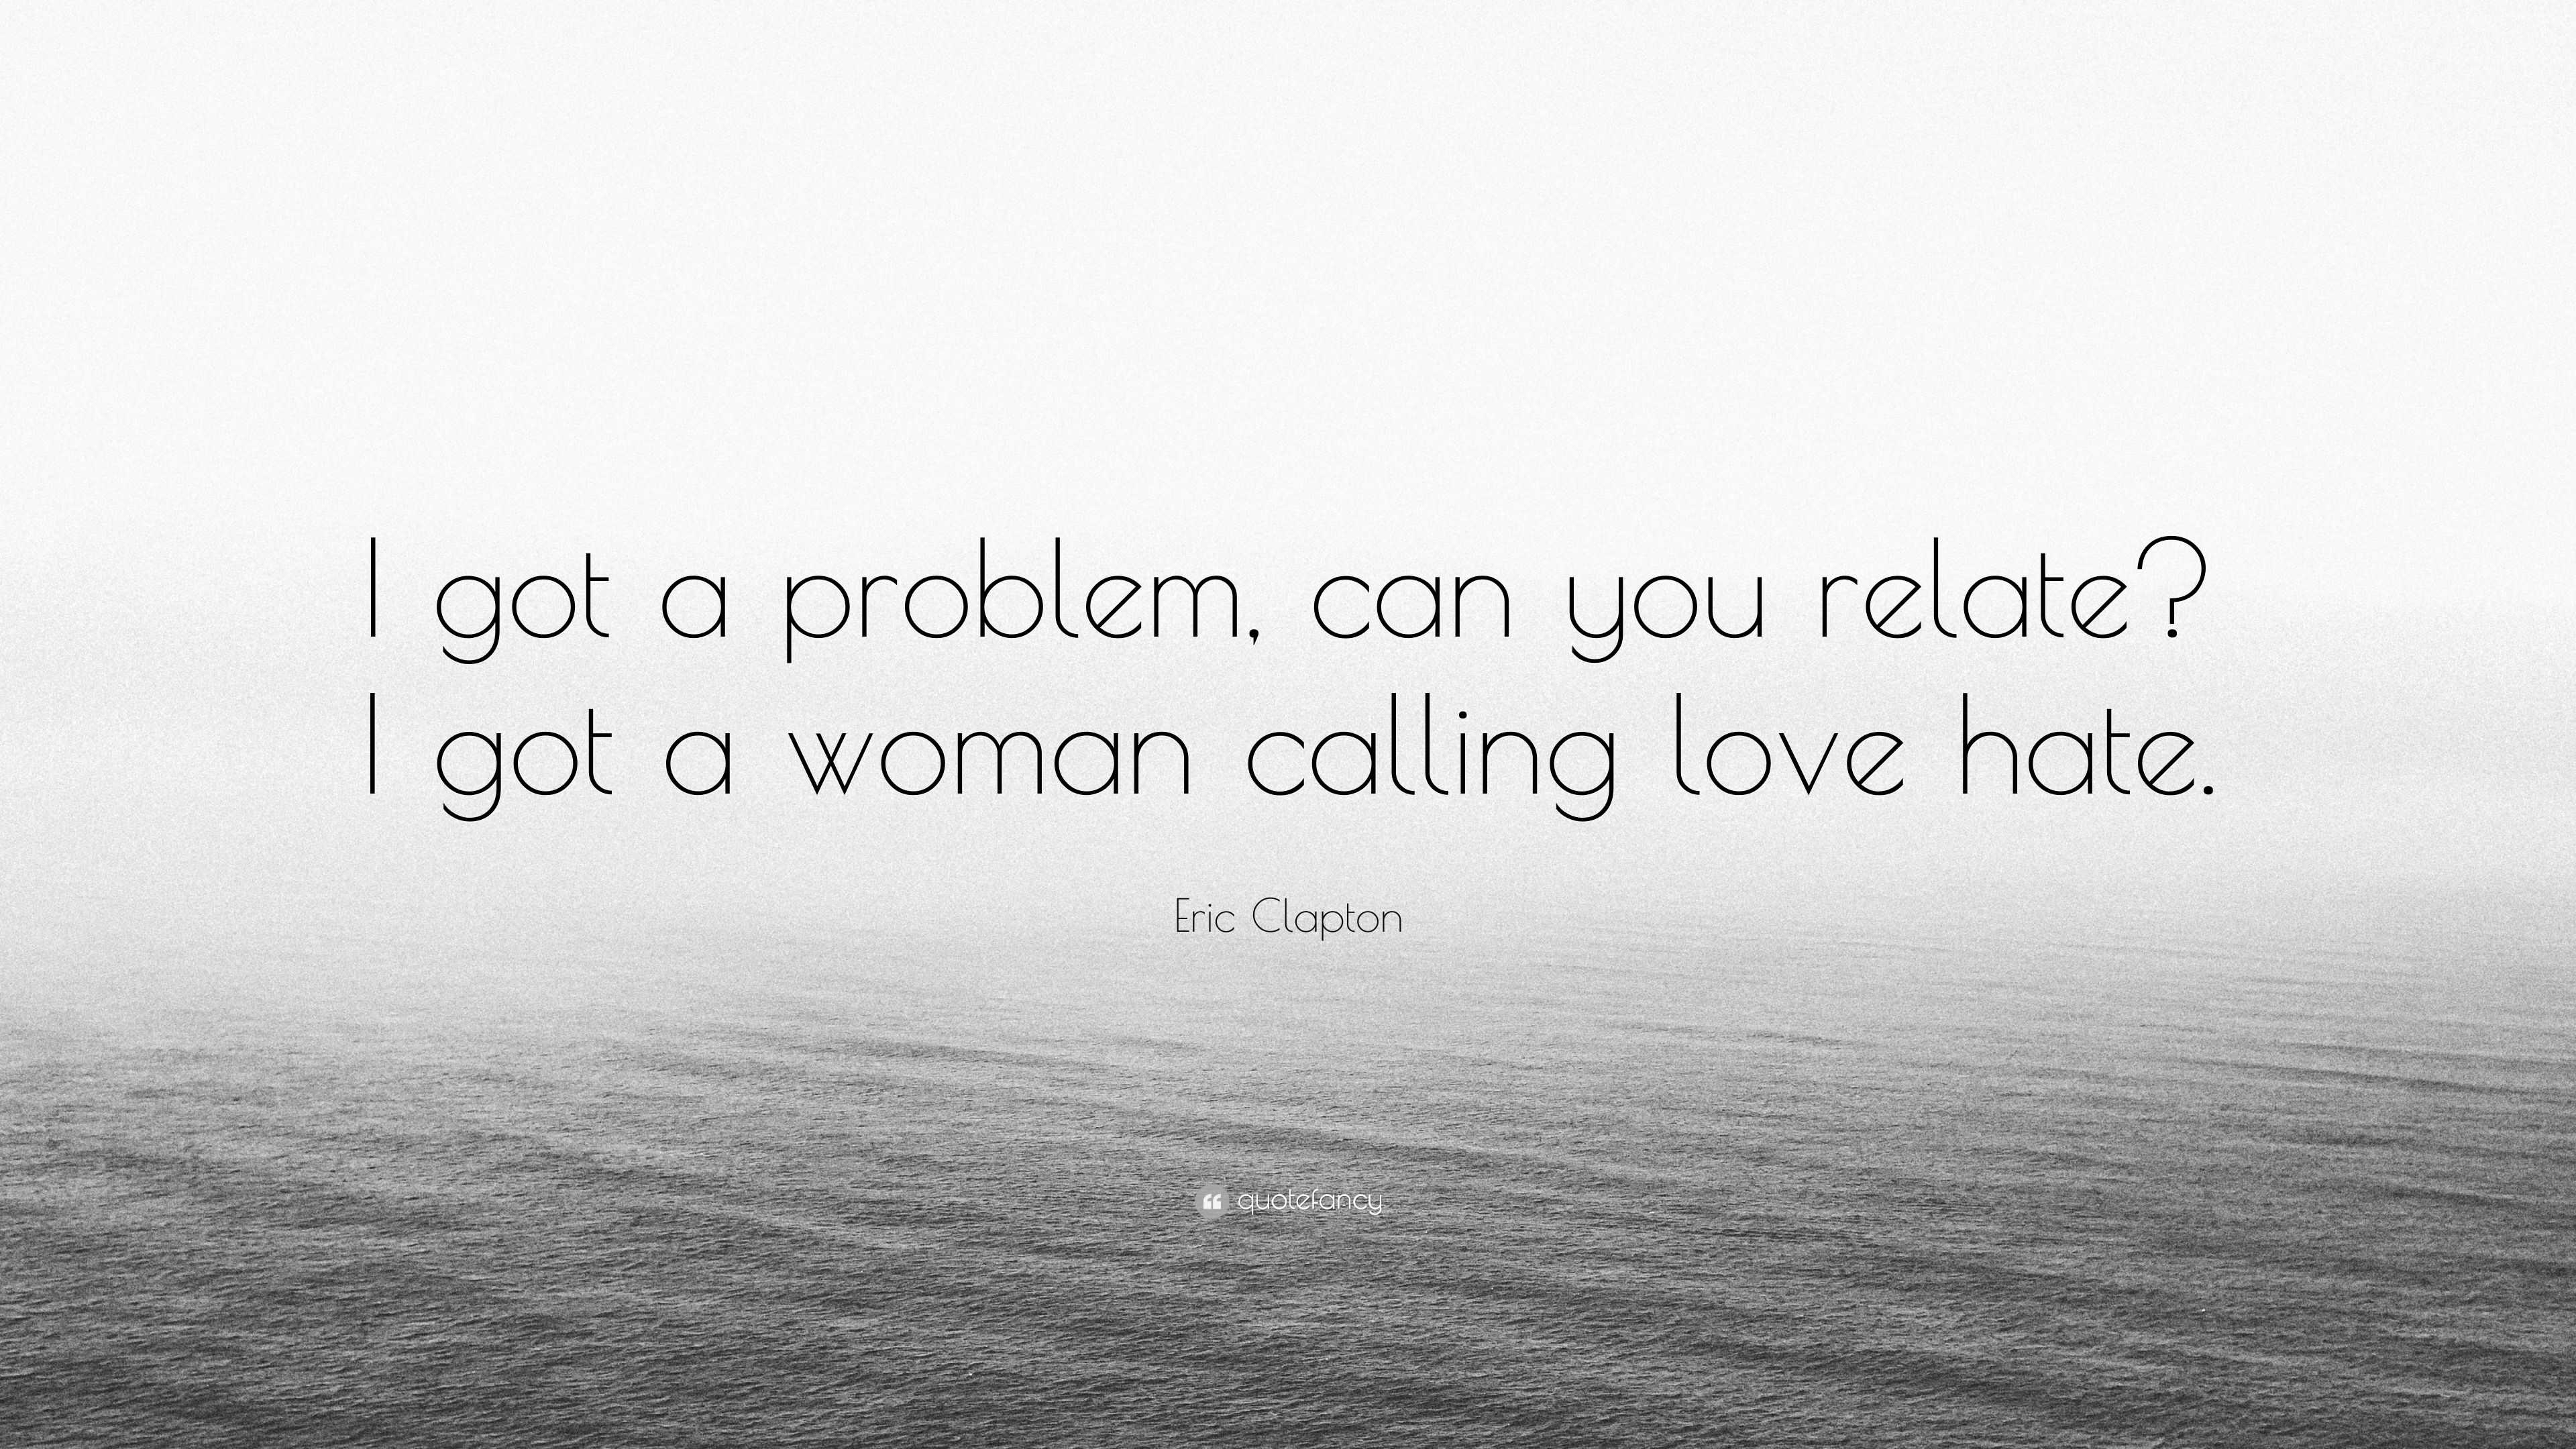 Eric Clapton Quote “I got a problem can you relate I got